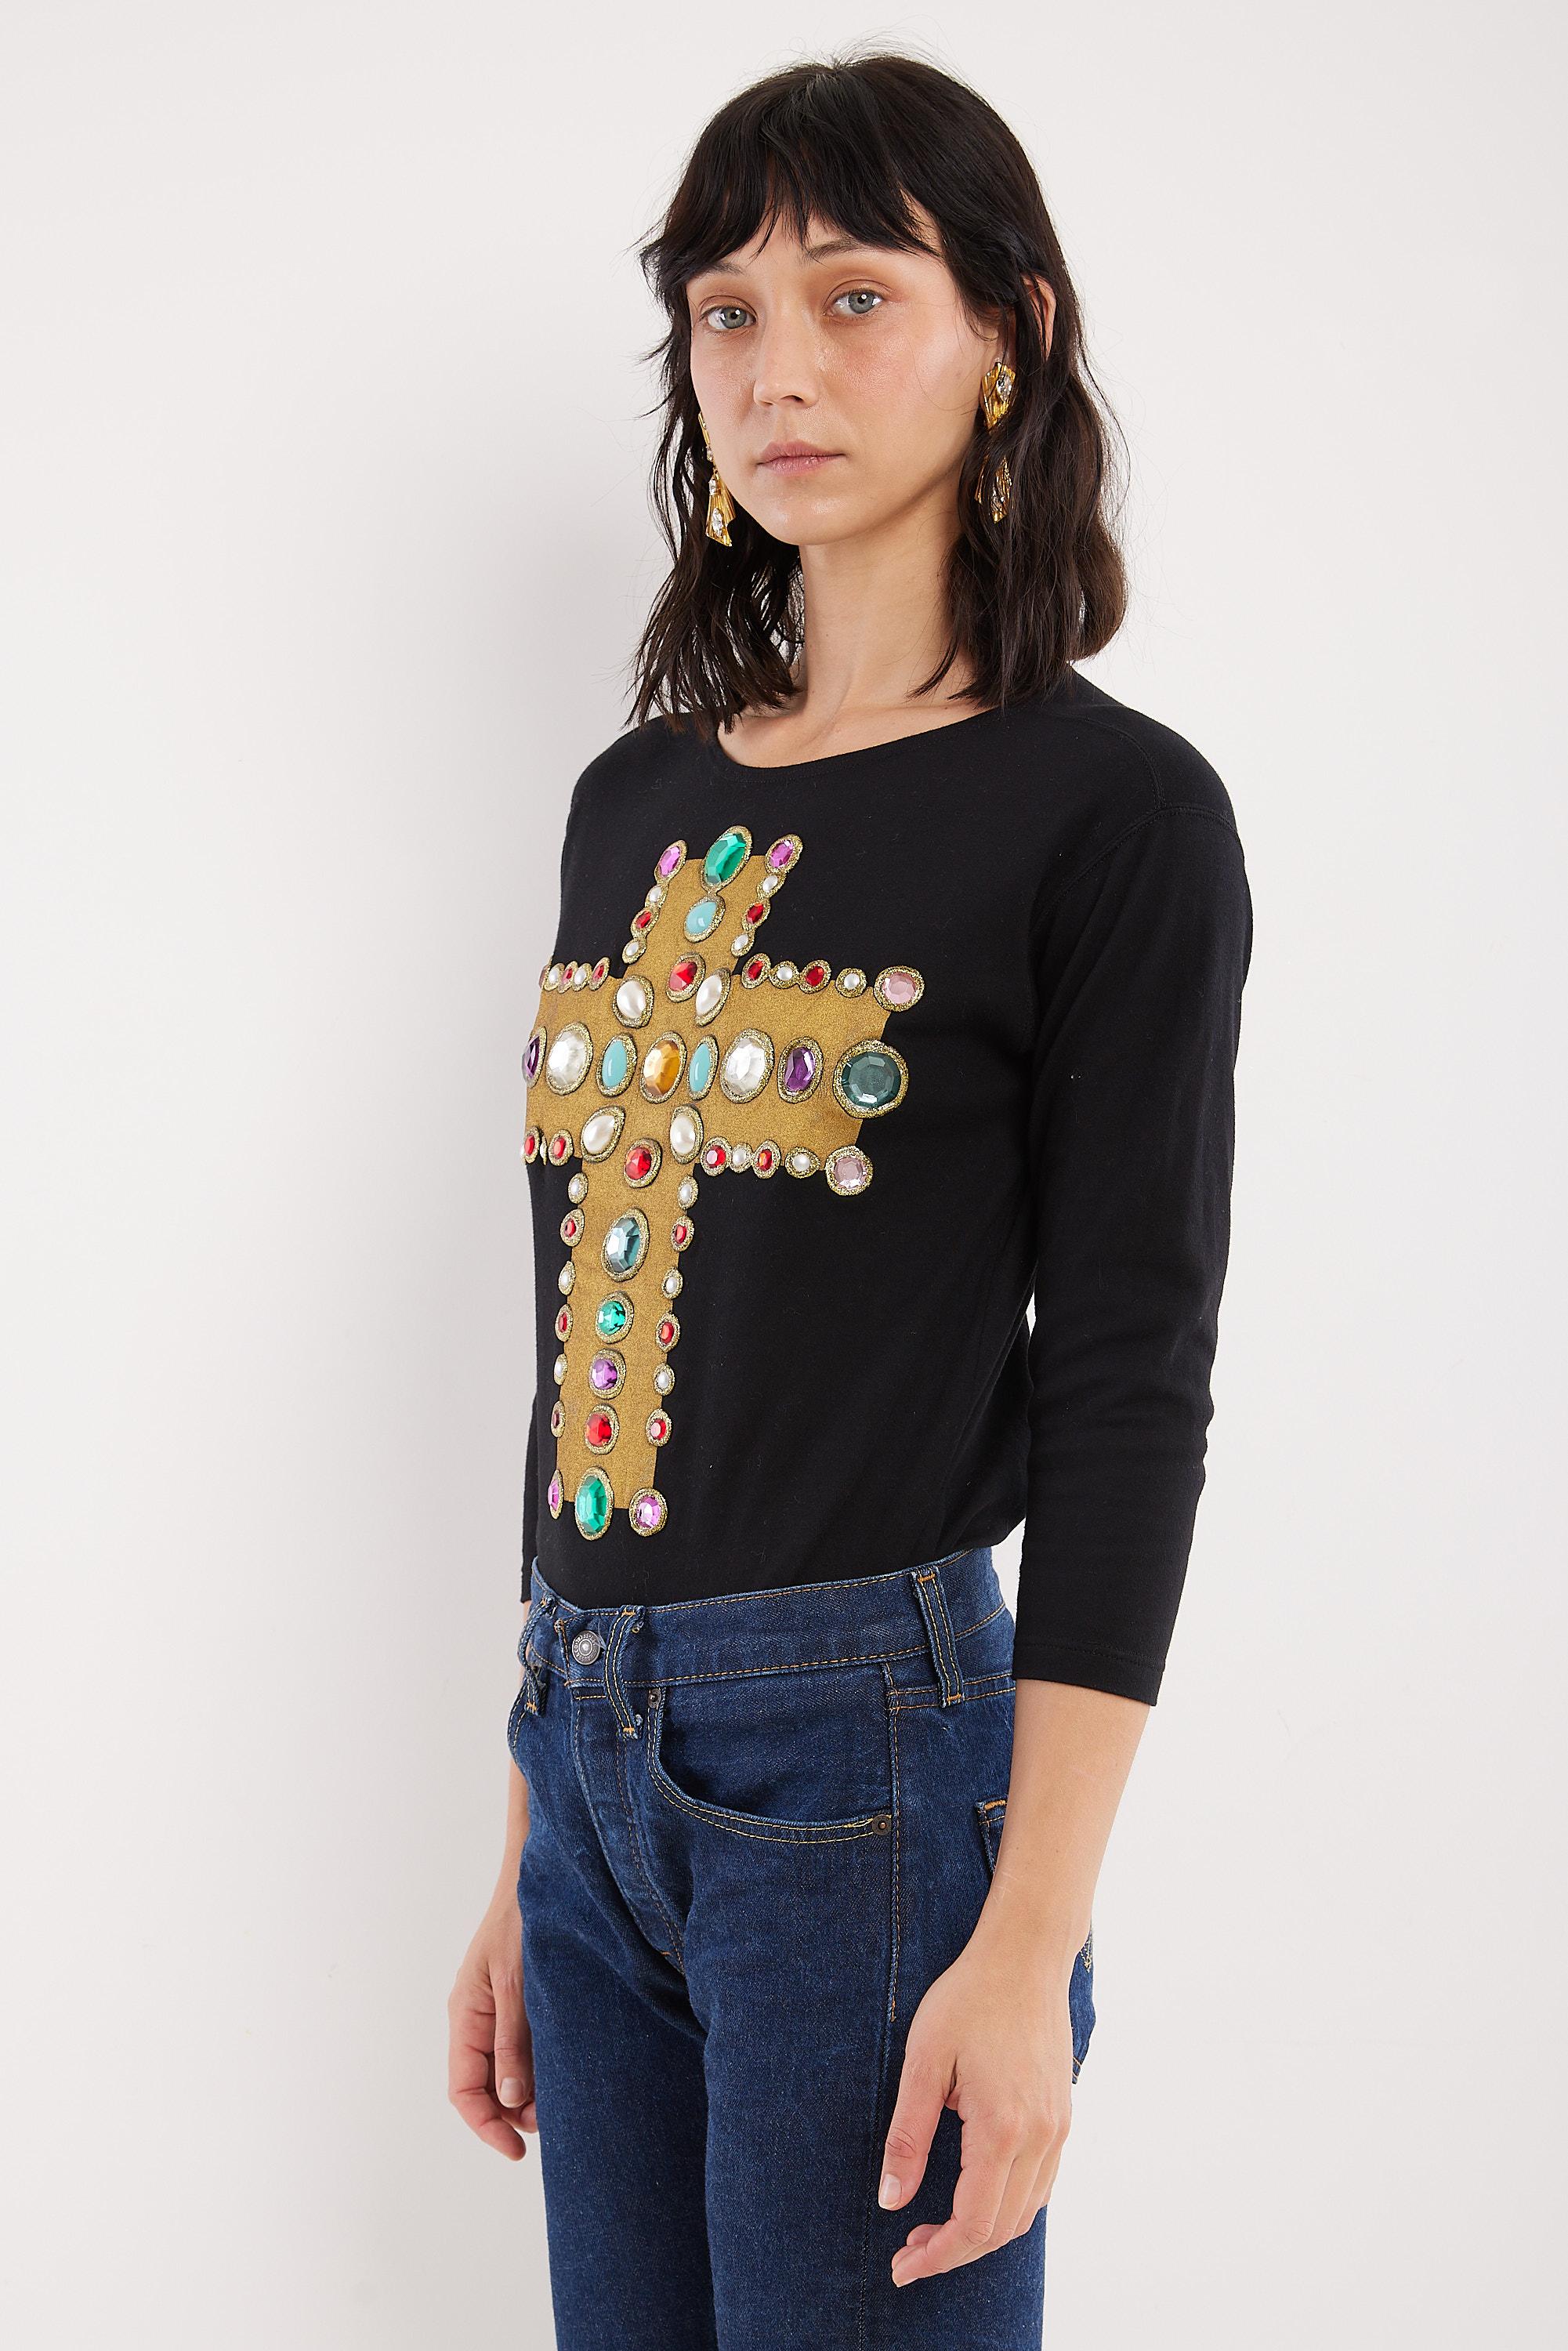 Christian Lacroix F/W 1998 Byzantine Cross Bejewelled Top T-shirt In Excellent Condition In BELLEVUE HILL, NSW